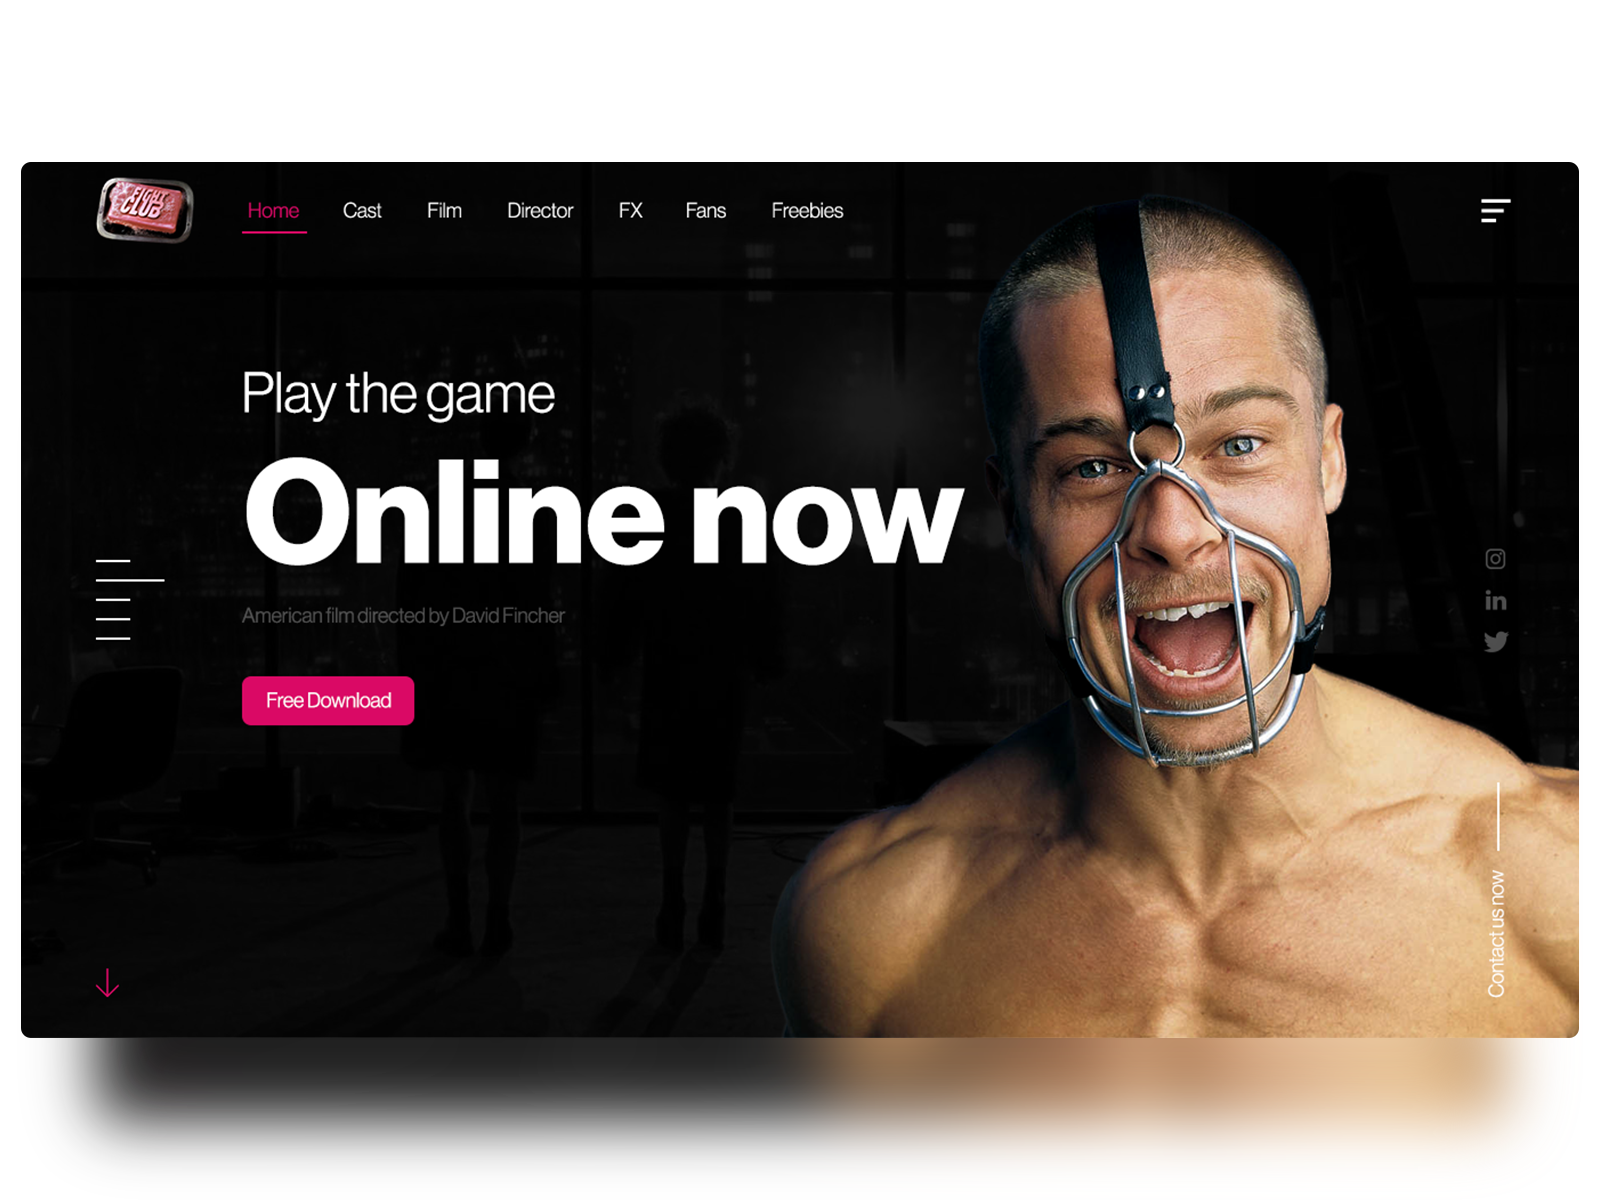 Welcome to The Fight Club by Jorge Rafael Rivera on Dribbble